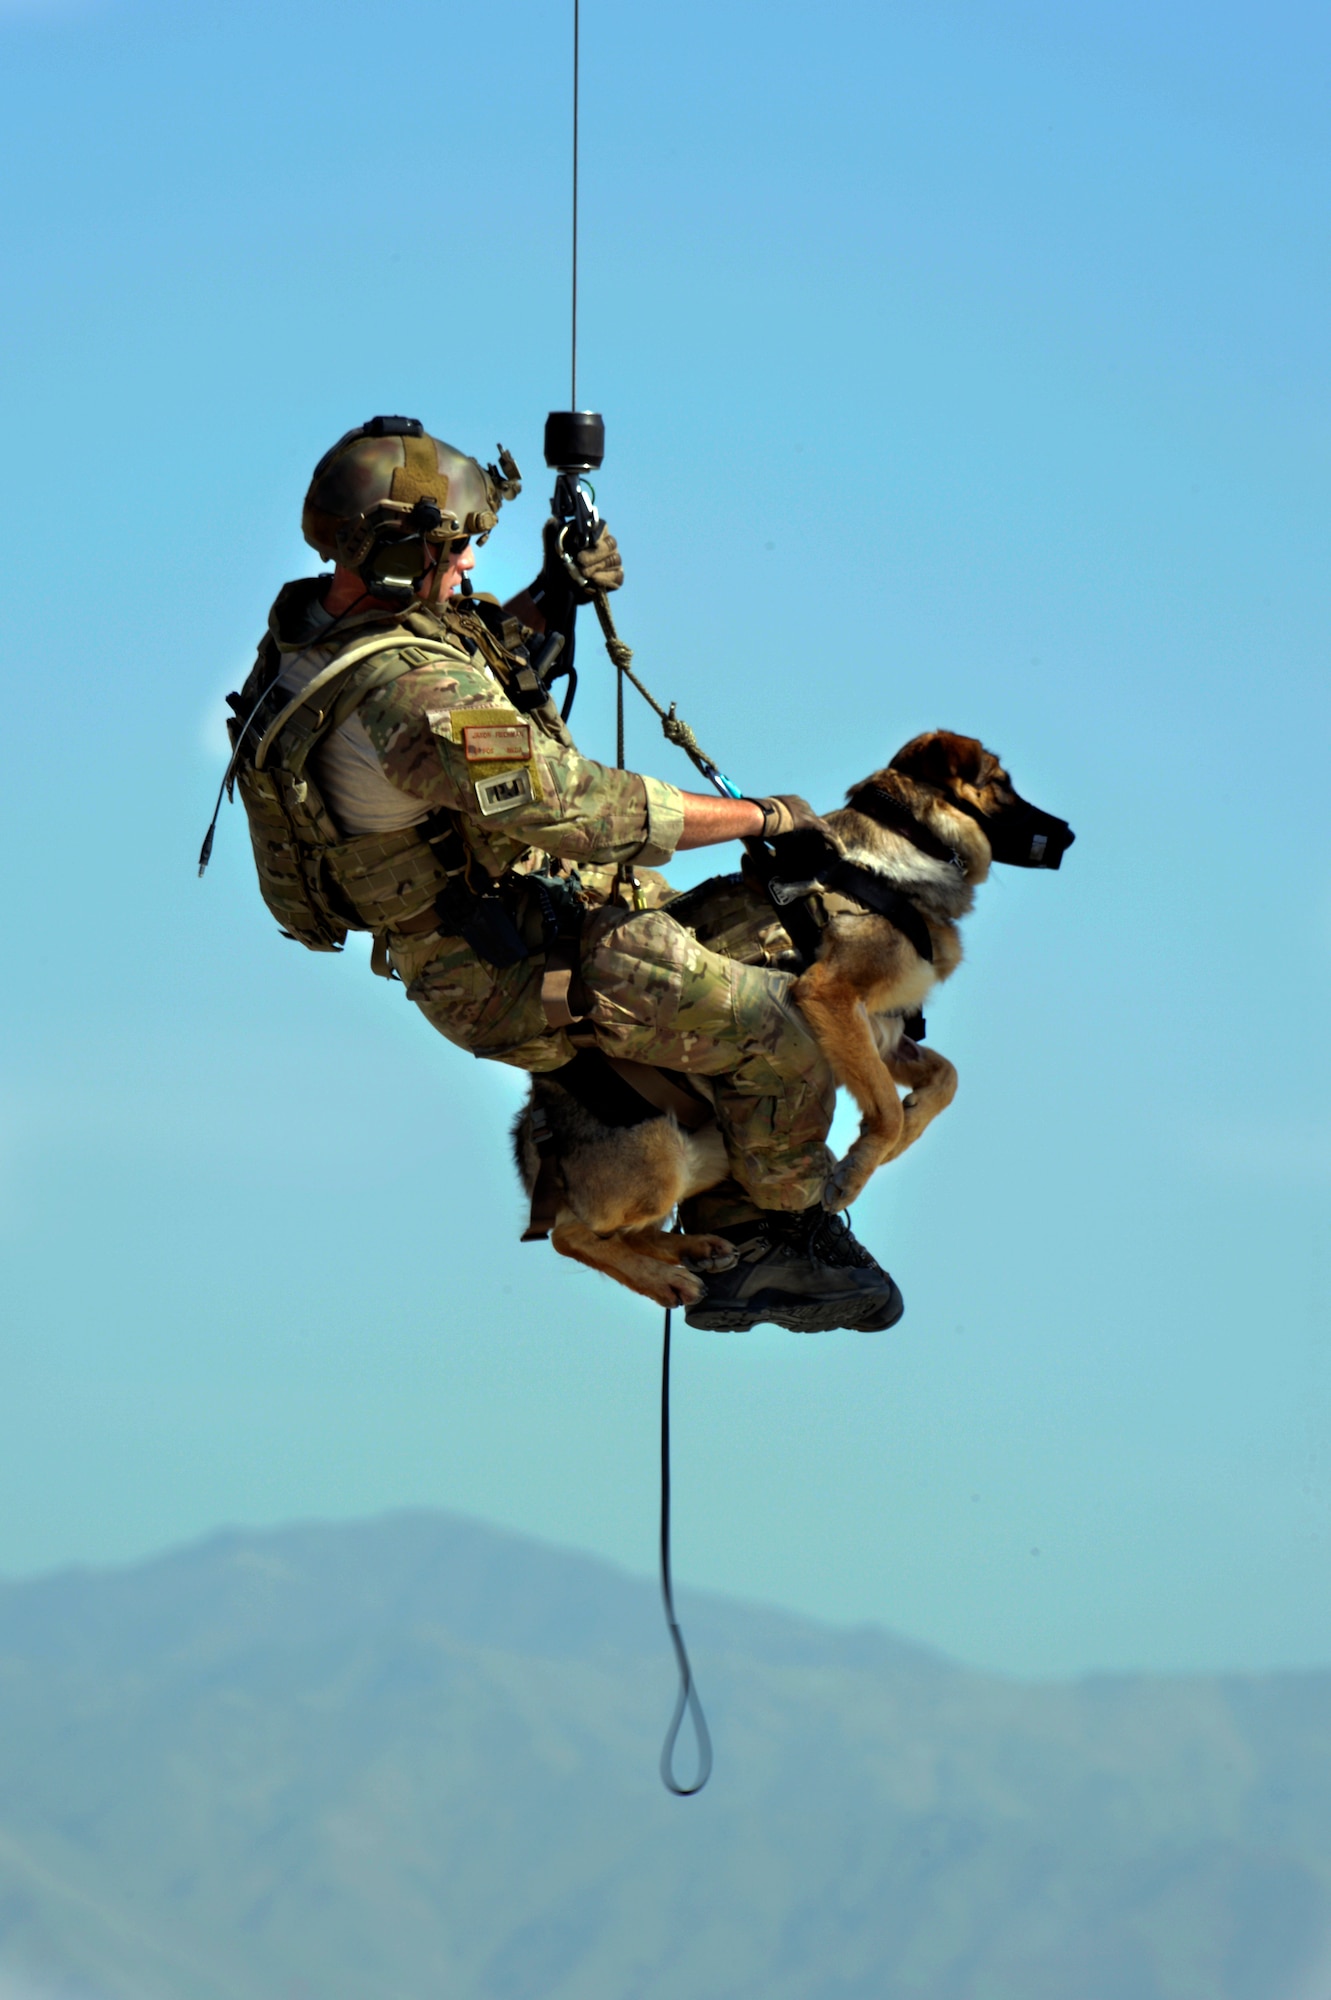 Senior Airman Jason Fischman, 83rd Expeditionary Rescue Squadron pararescueman, hoists an U.S. Army tactical explosive detection dogs into a HH-60G Pave Hawk helicopter during a joint rescue training scenario at Bagram Airfield, Afghanistan, June 21, 2013.  This training was a first for both branches and prepared them for future rescue missions.  Fischman is deployed from Royal Air Force Lakenheath, England. (U.S. Air Force photo/ Staff Sgt. Stephenie Wade)